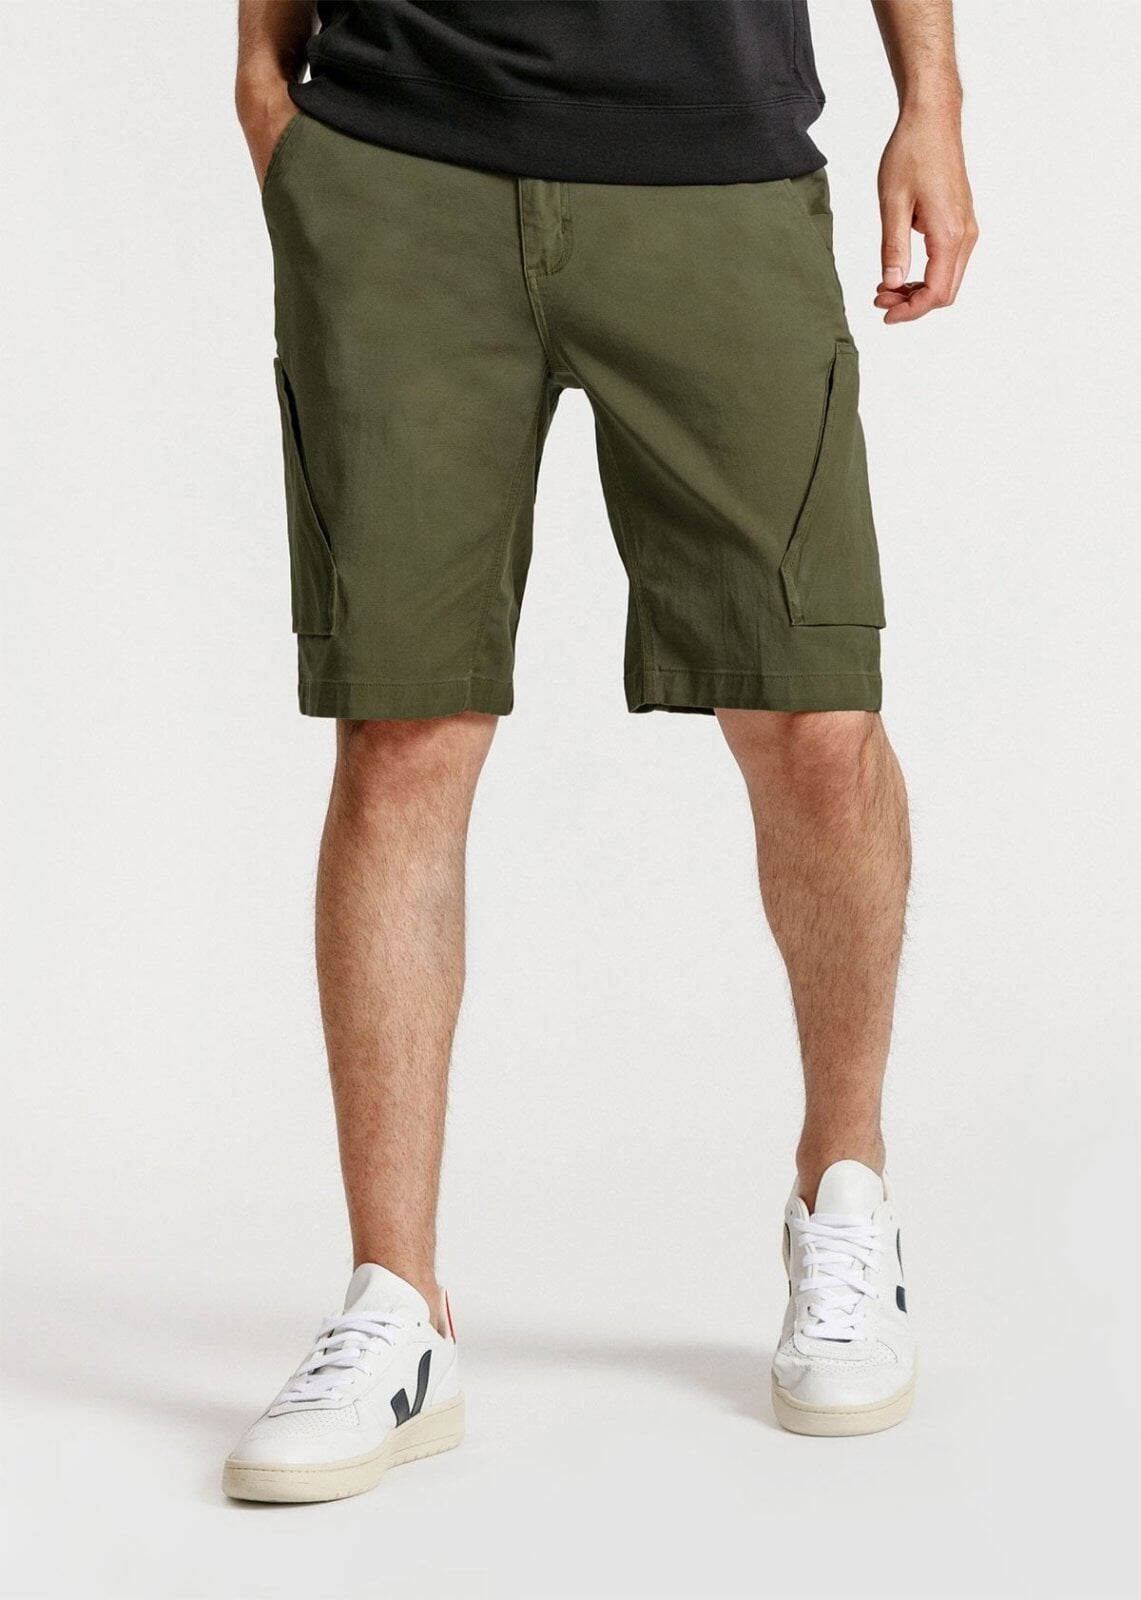 mens-green-athletic-adventure-pant-front